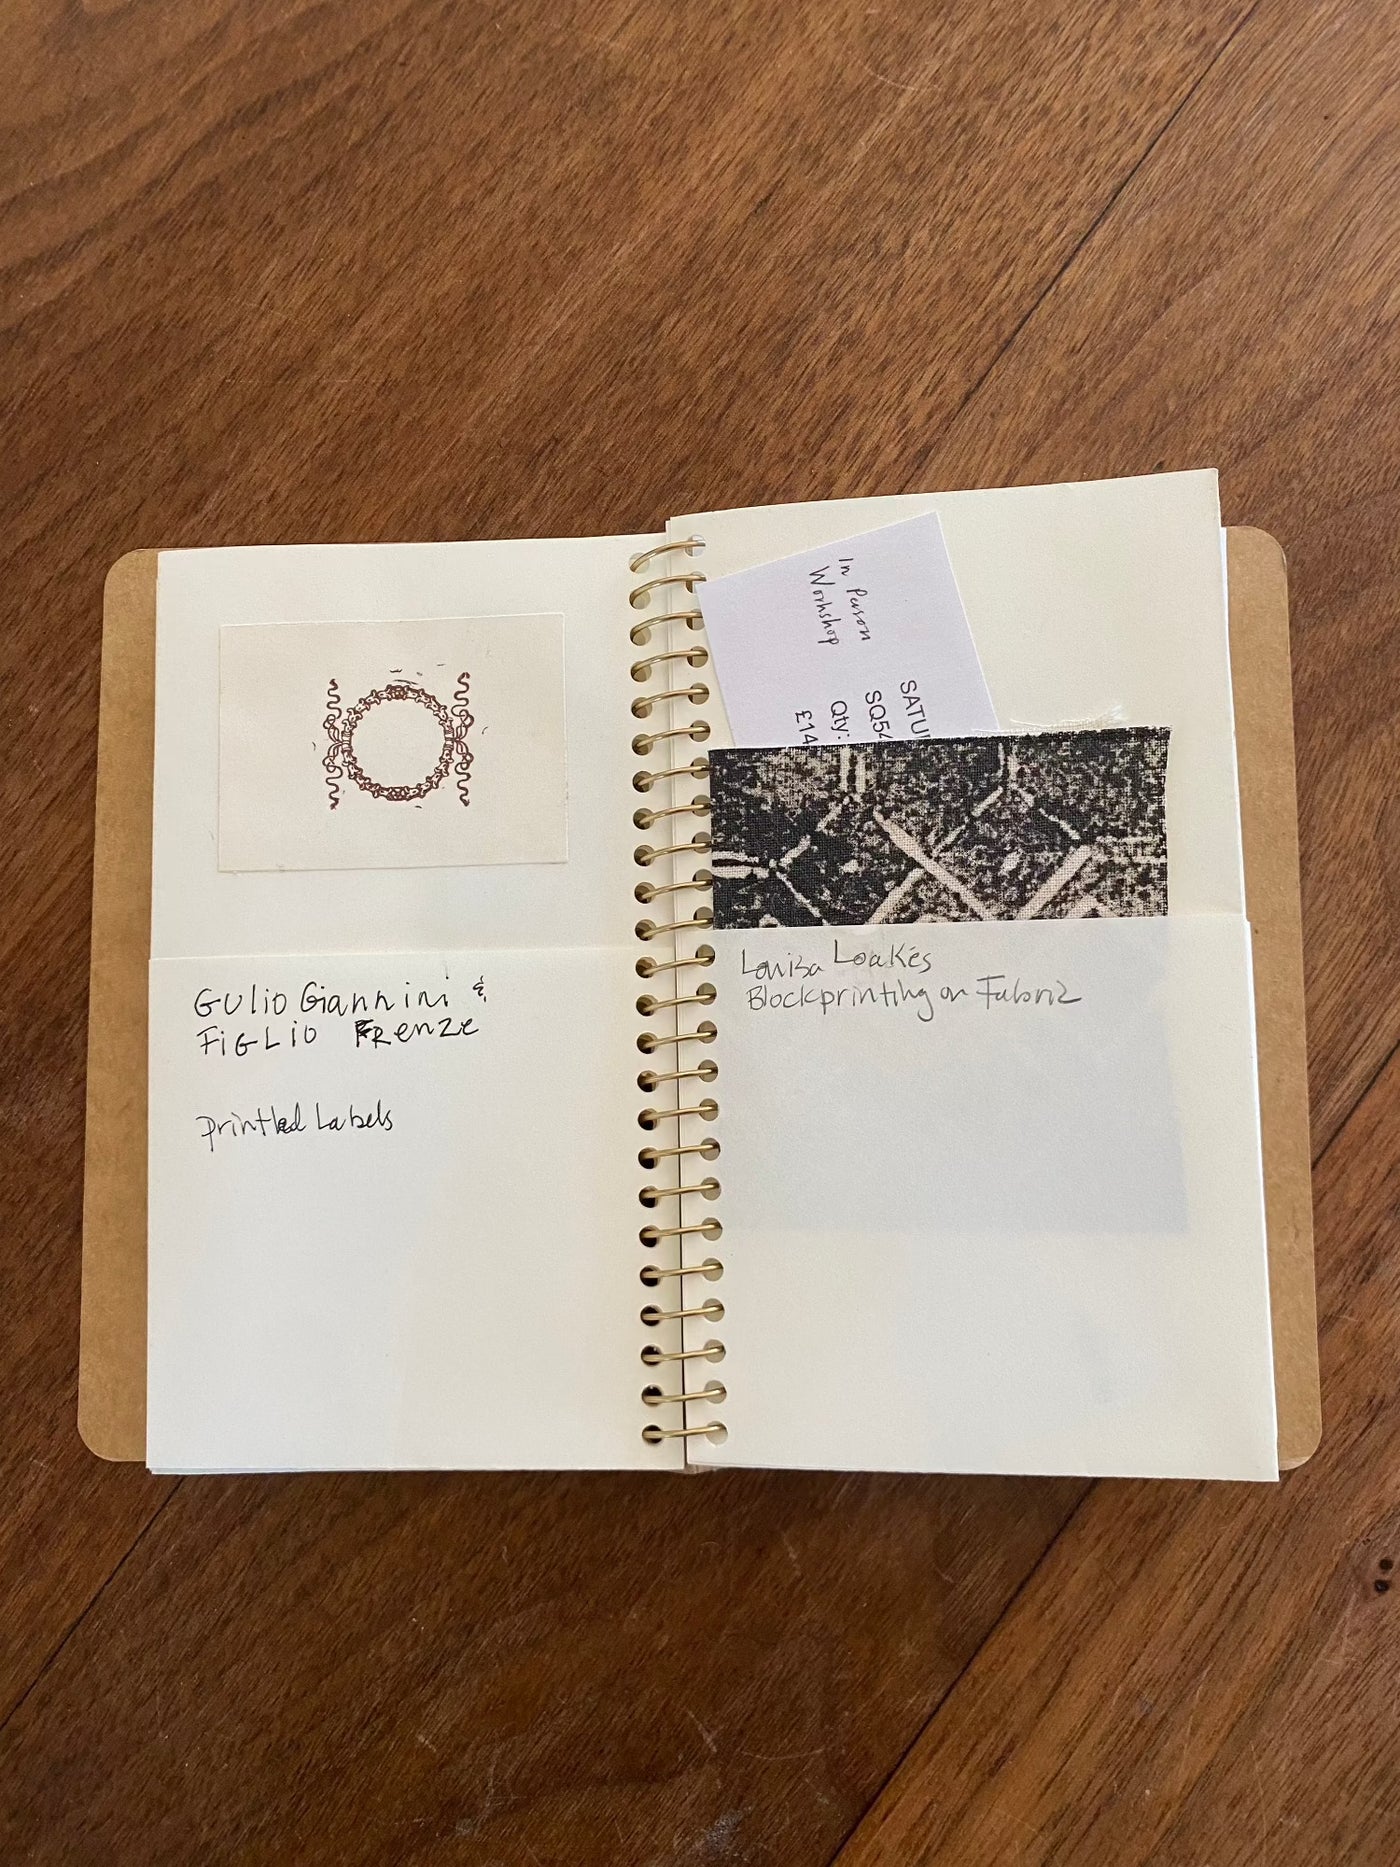 Notebook from my latest travels